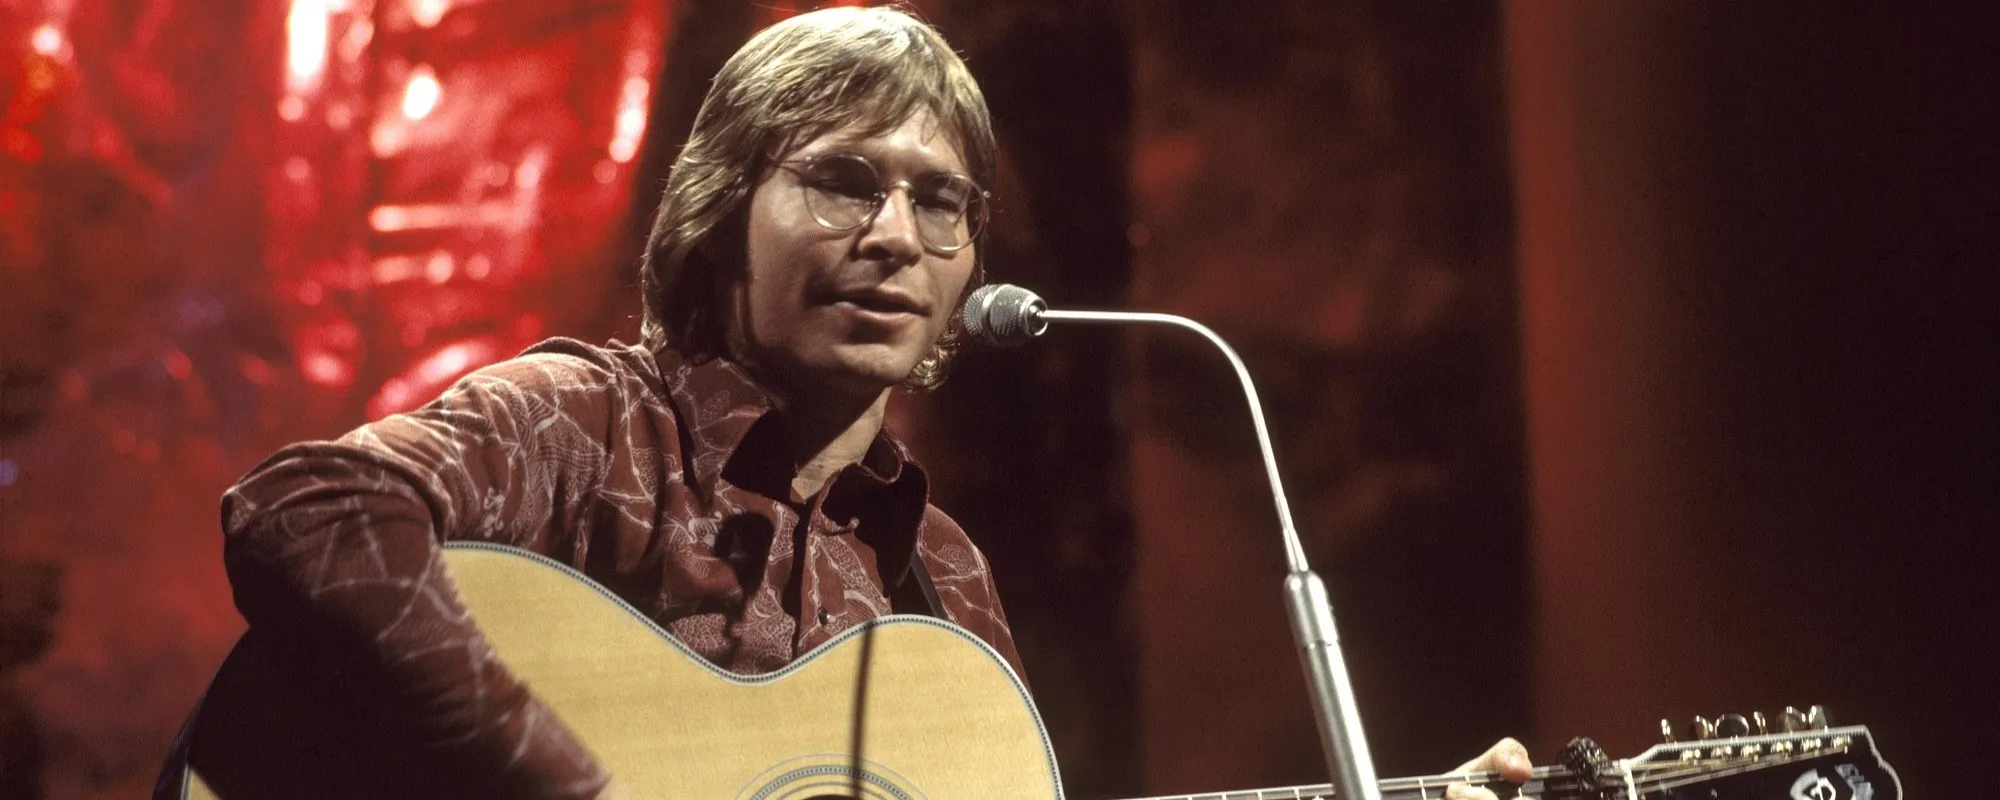 Remember When John Denver Topped the ‘Billboard’ 200 and Hot 100 Charts for the First Time 50 Years Ago